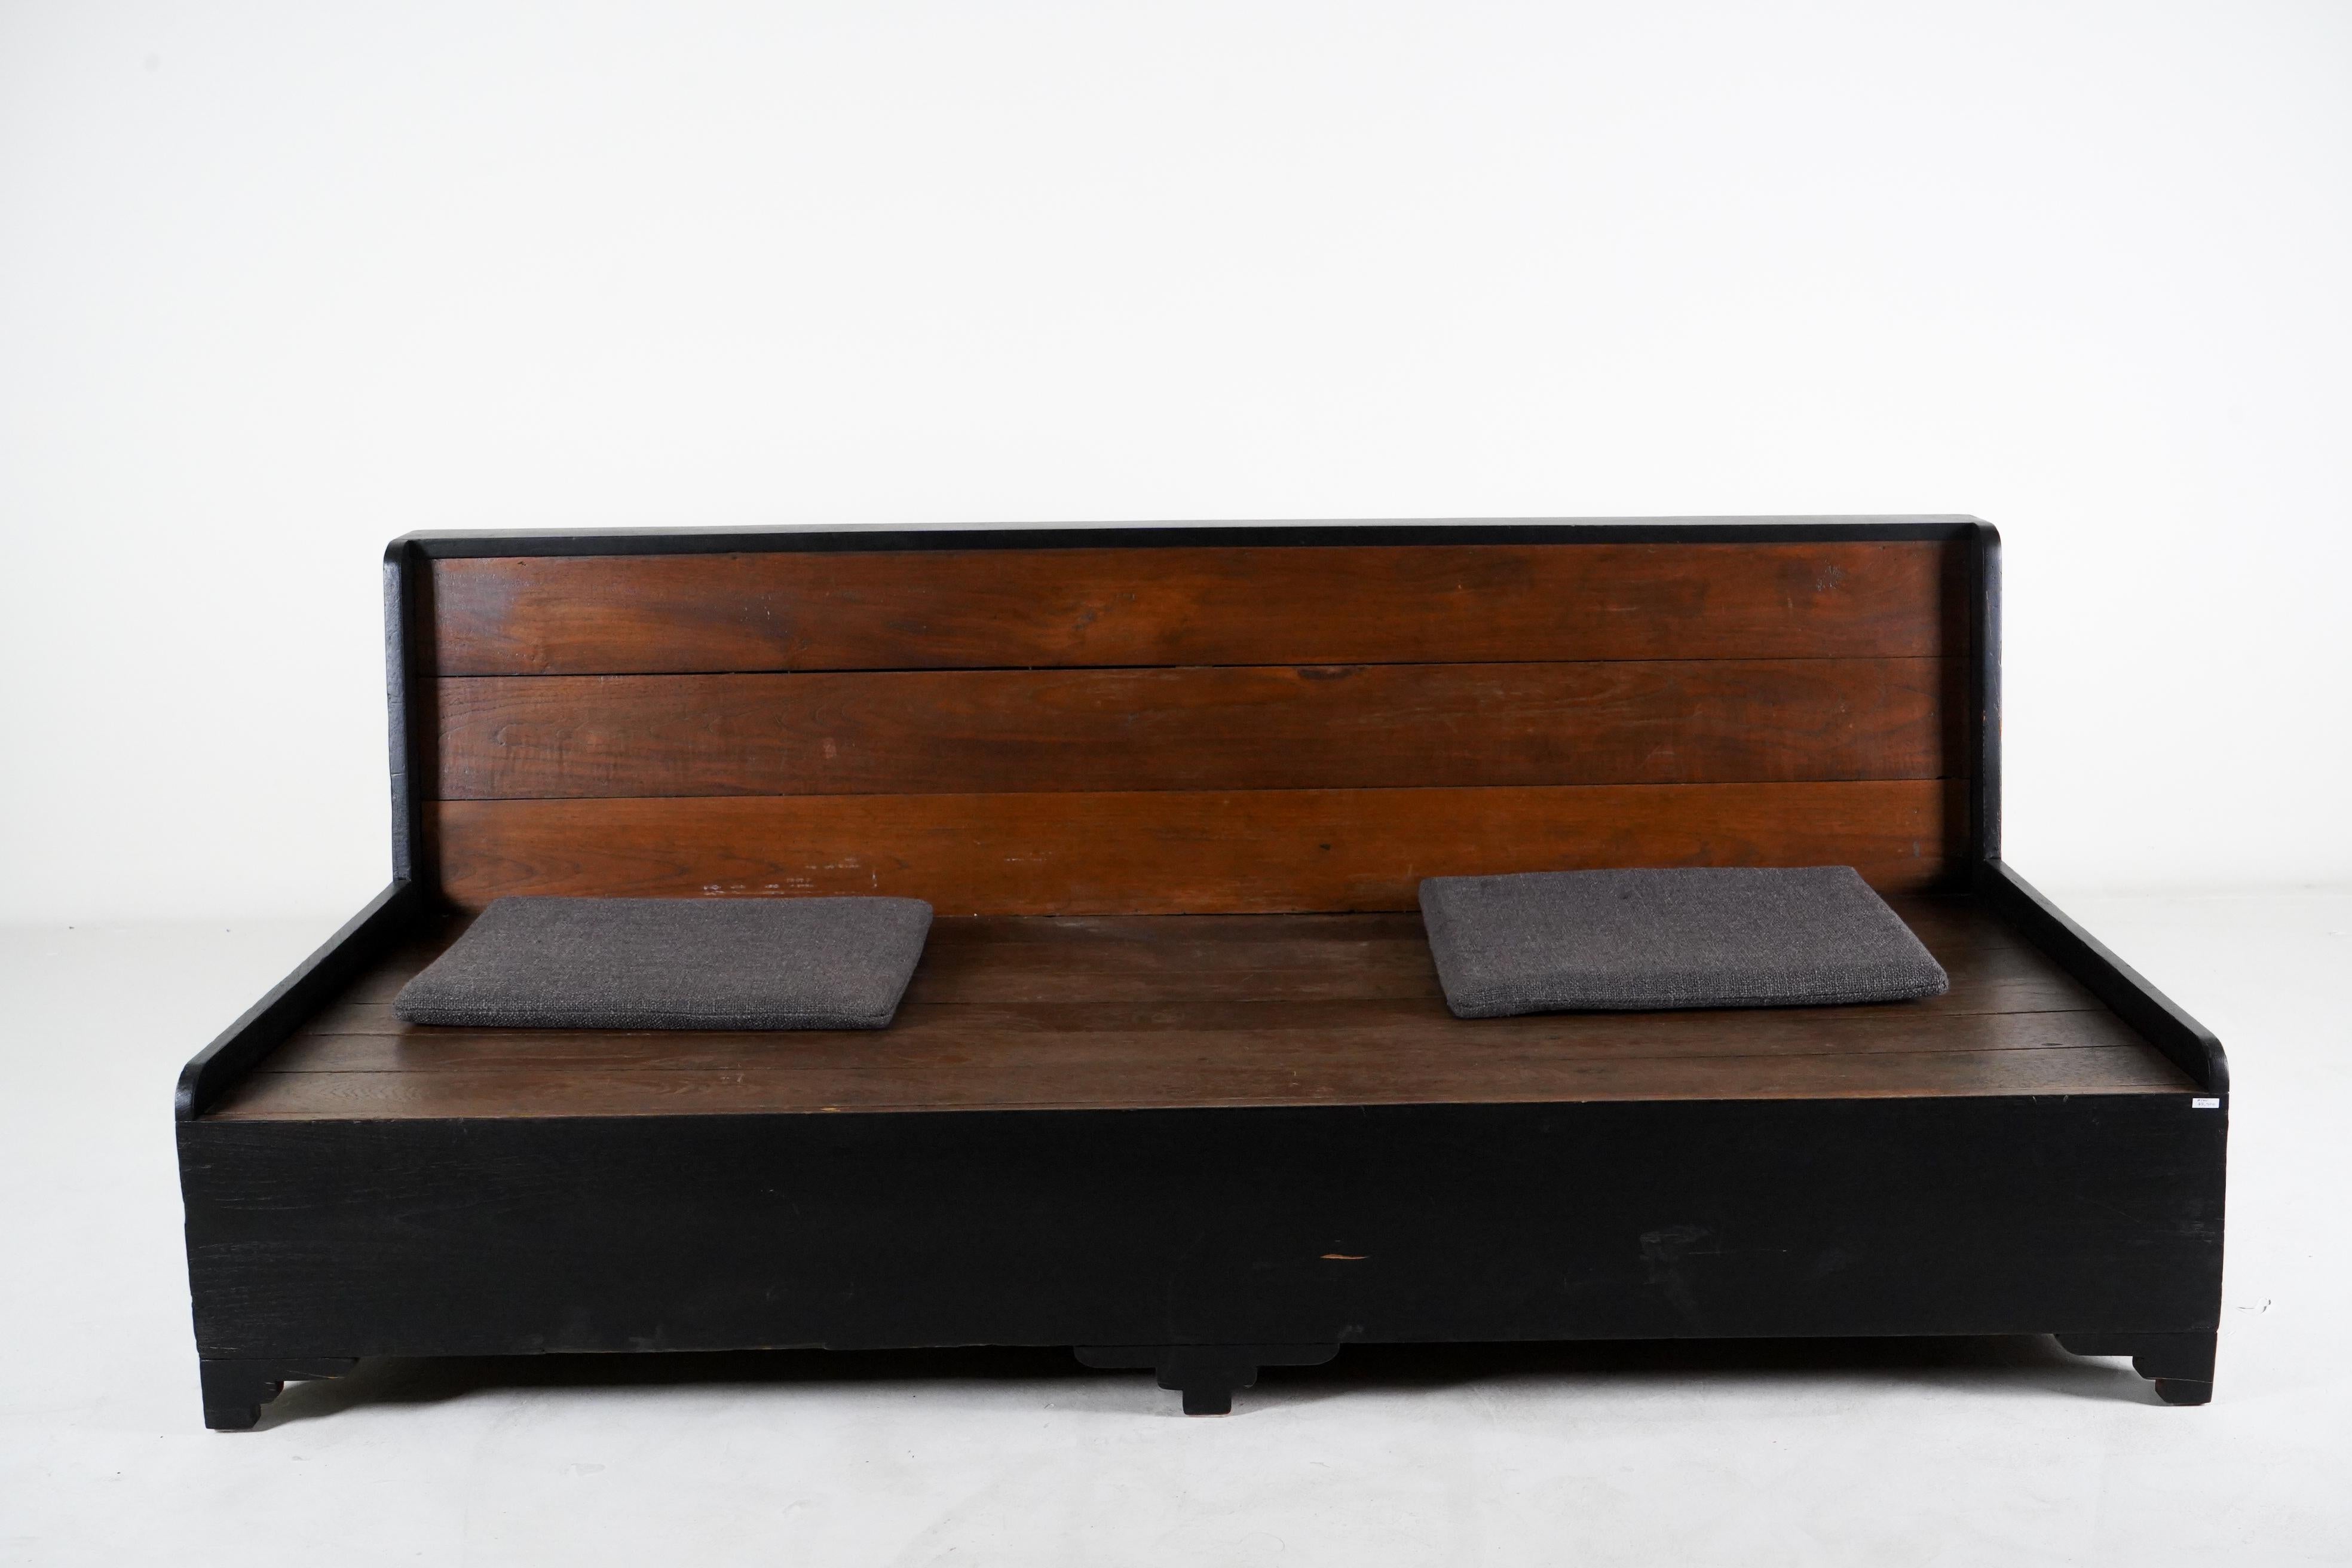 This British colonial era daybed in made from teak and dates to the 1930's. During the British Empire in Burma much furniture was made in the Anglo-Indian style using native hardwoods and local craftsmen. Styles closely matched European ones of the